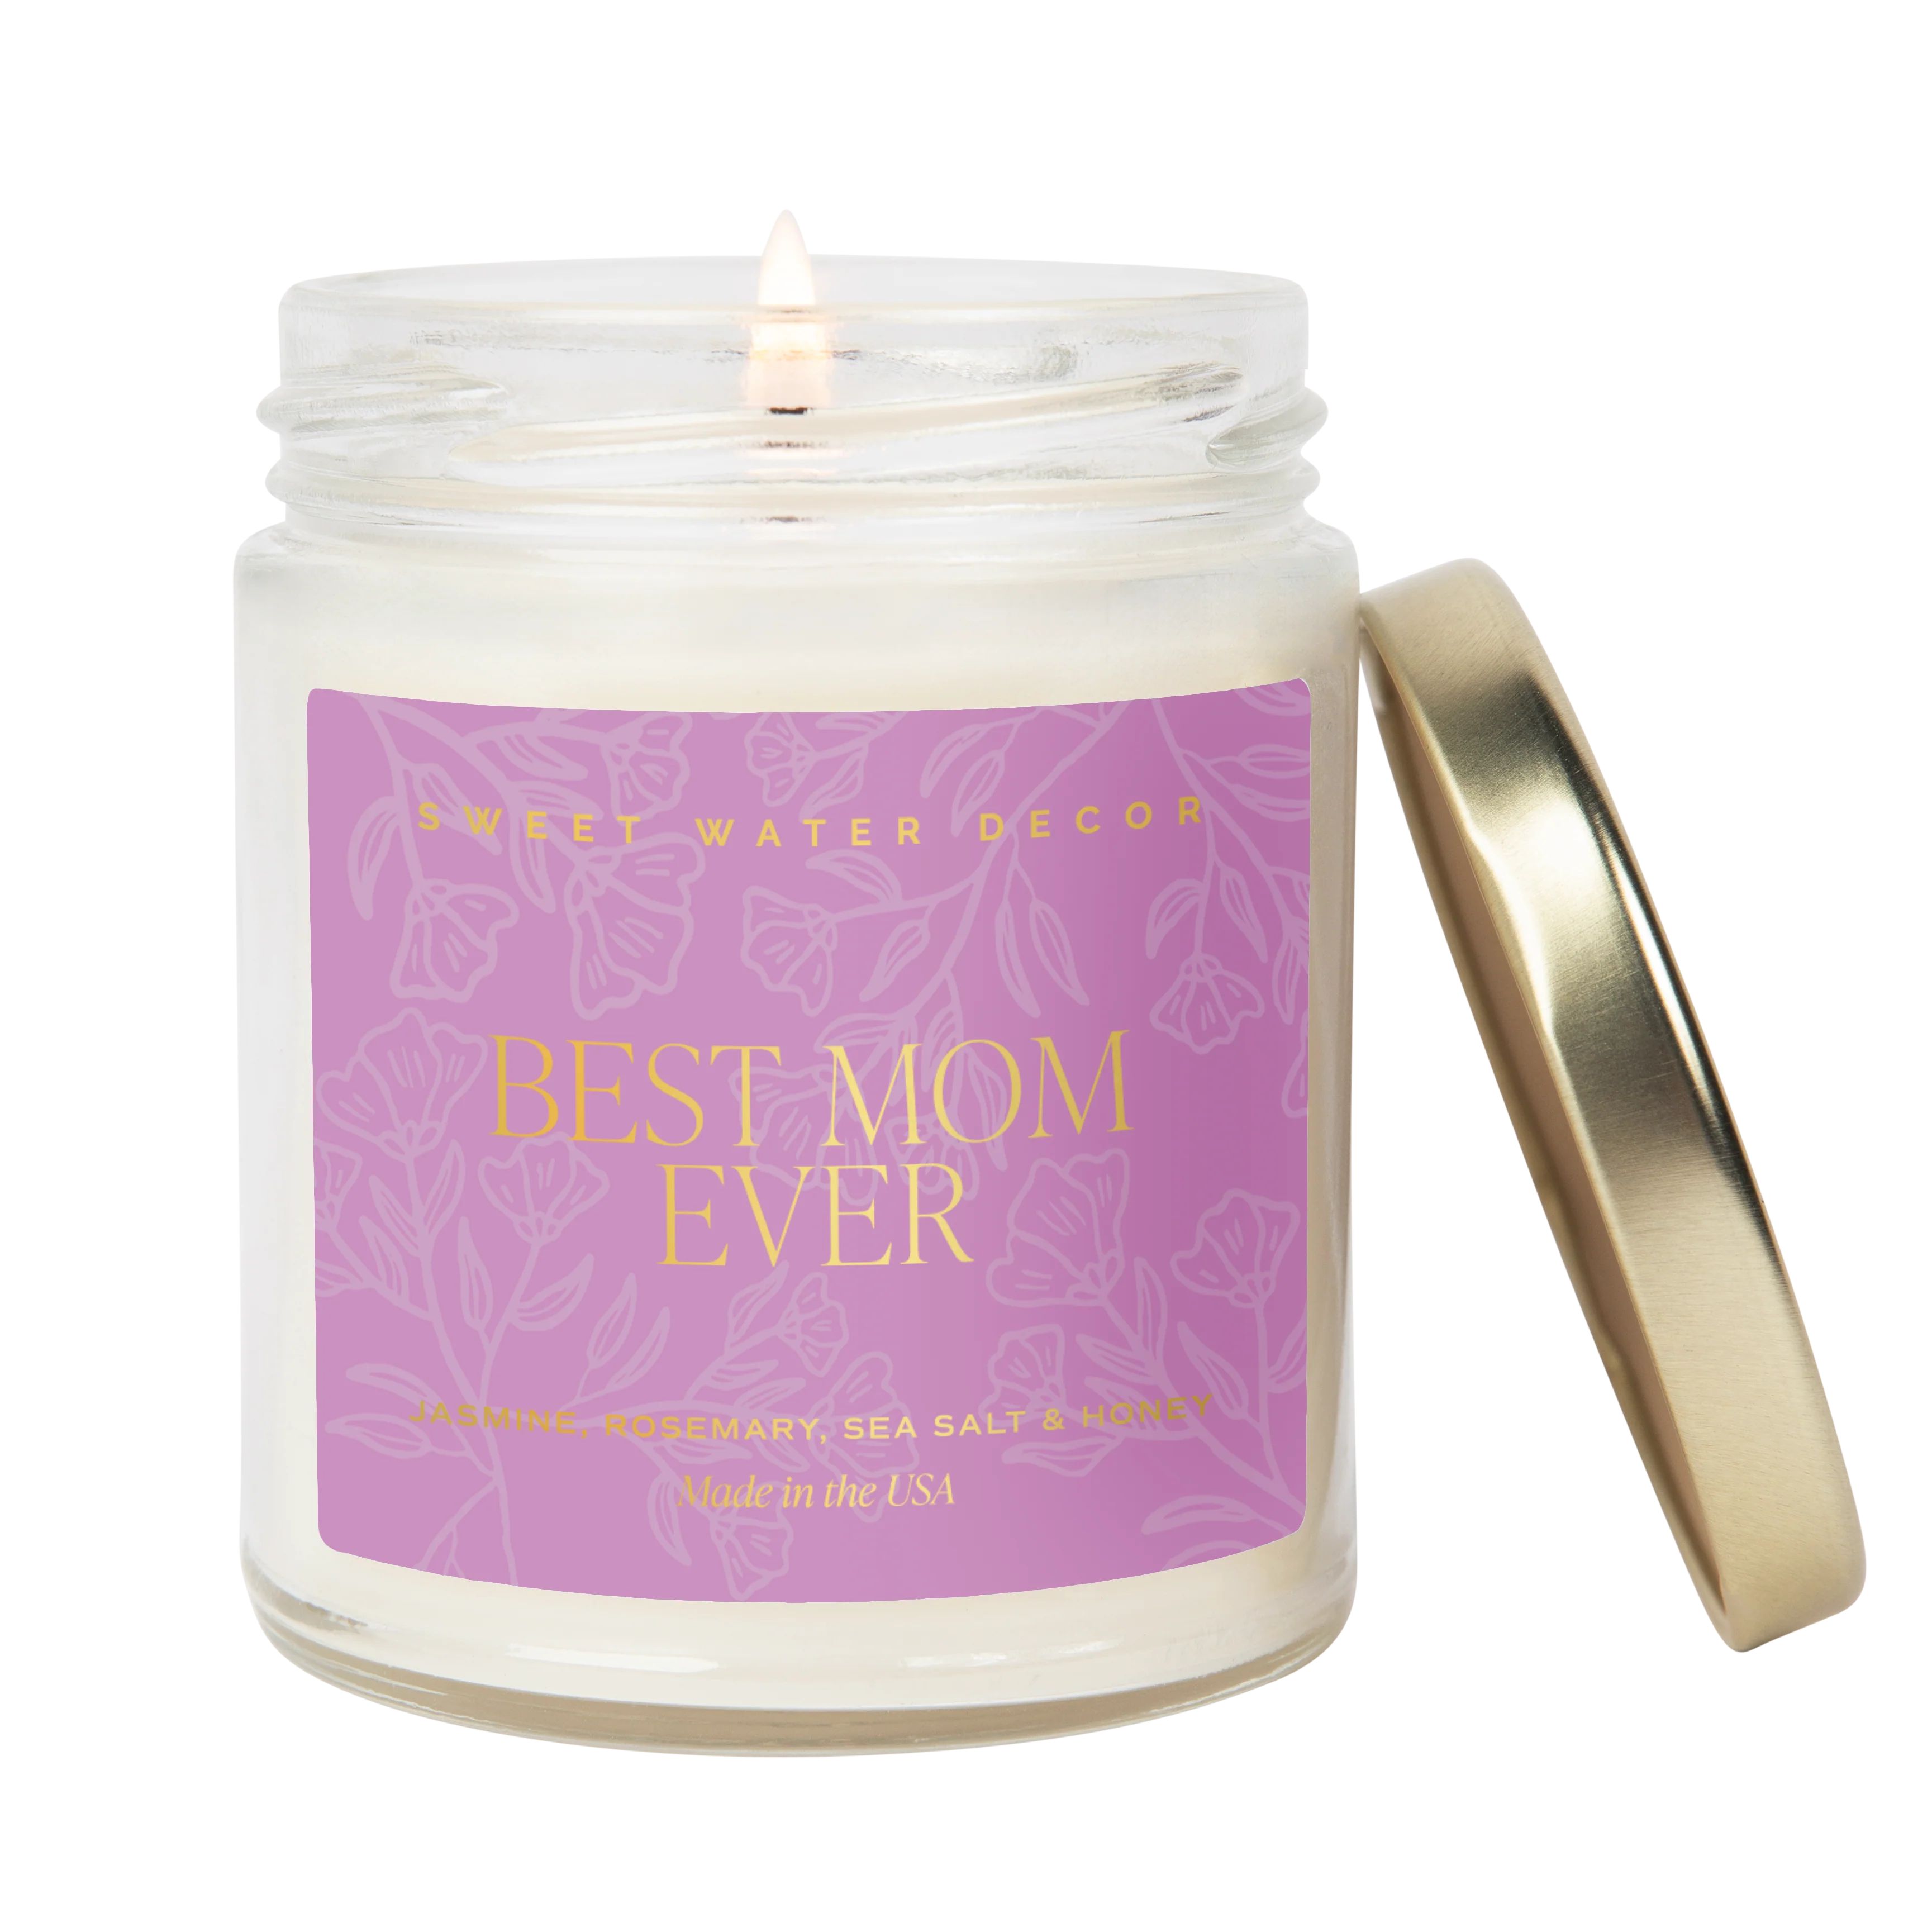 Best Mom Ever Soy Candle - Clear Jar - 9 oz (Wildflowers and Salt) | Sweet Water Decor, LLC